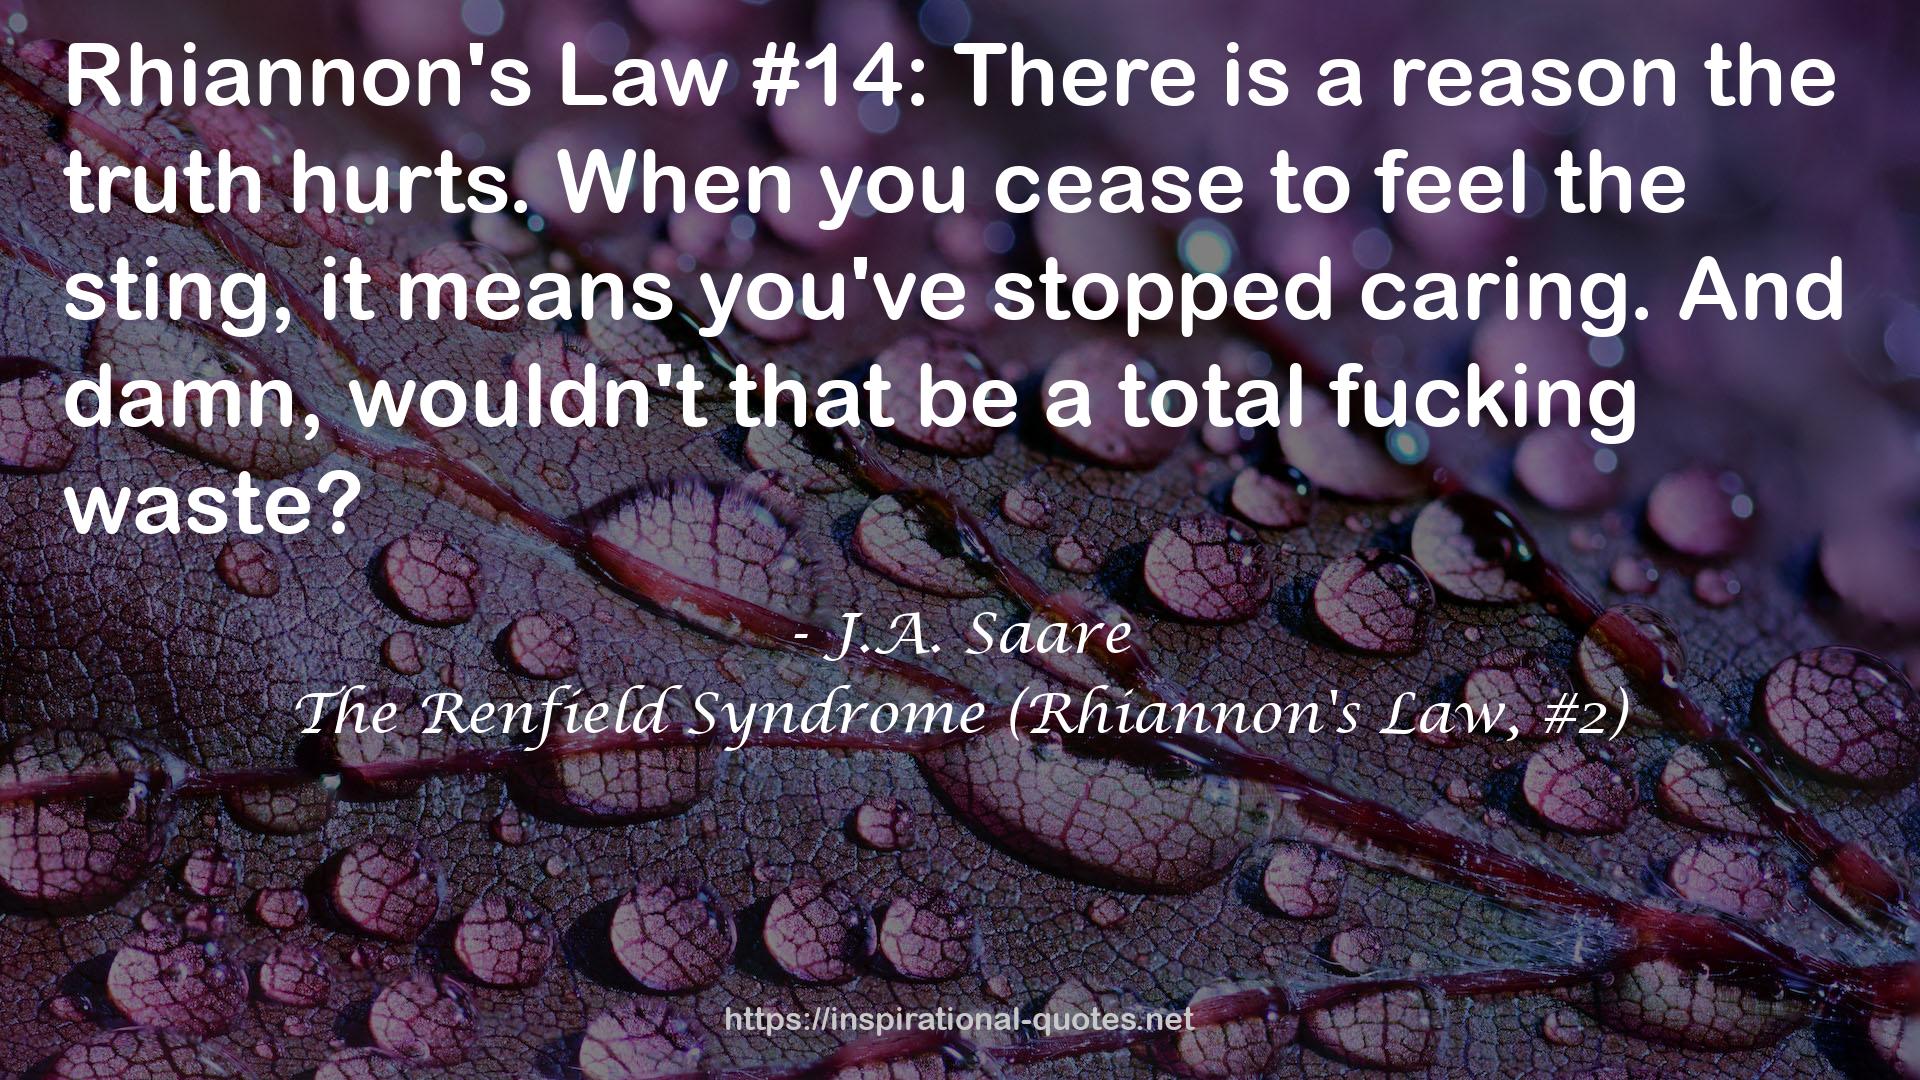 The Renfield Syndrome (Rhiannon's Law, #2) QUOTES